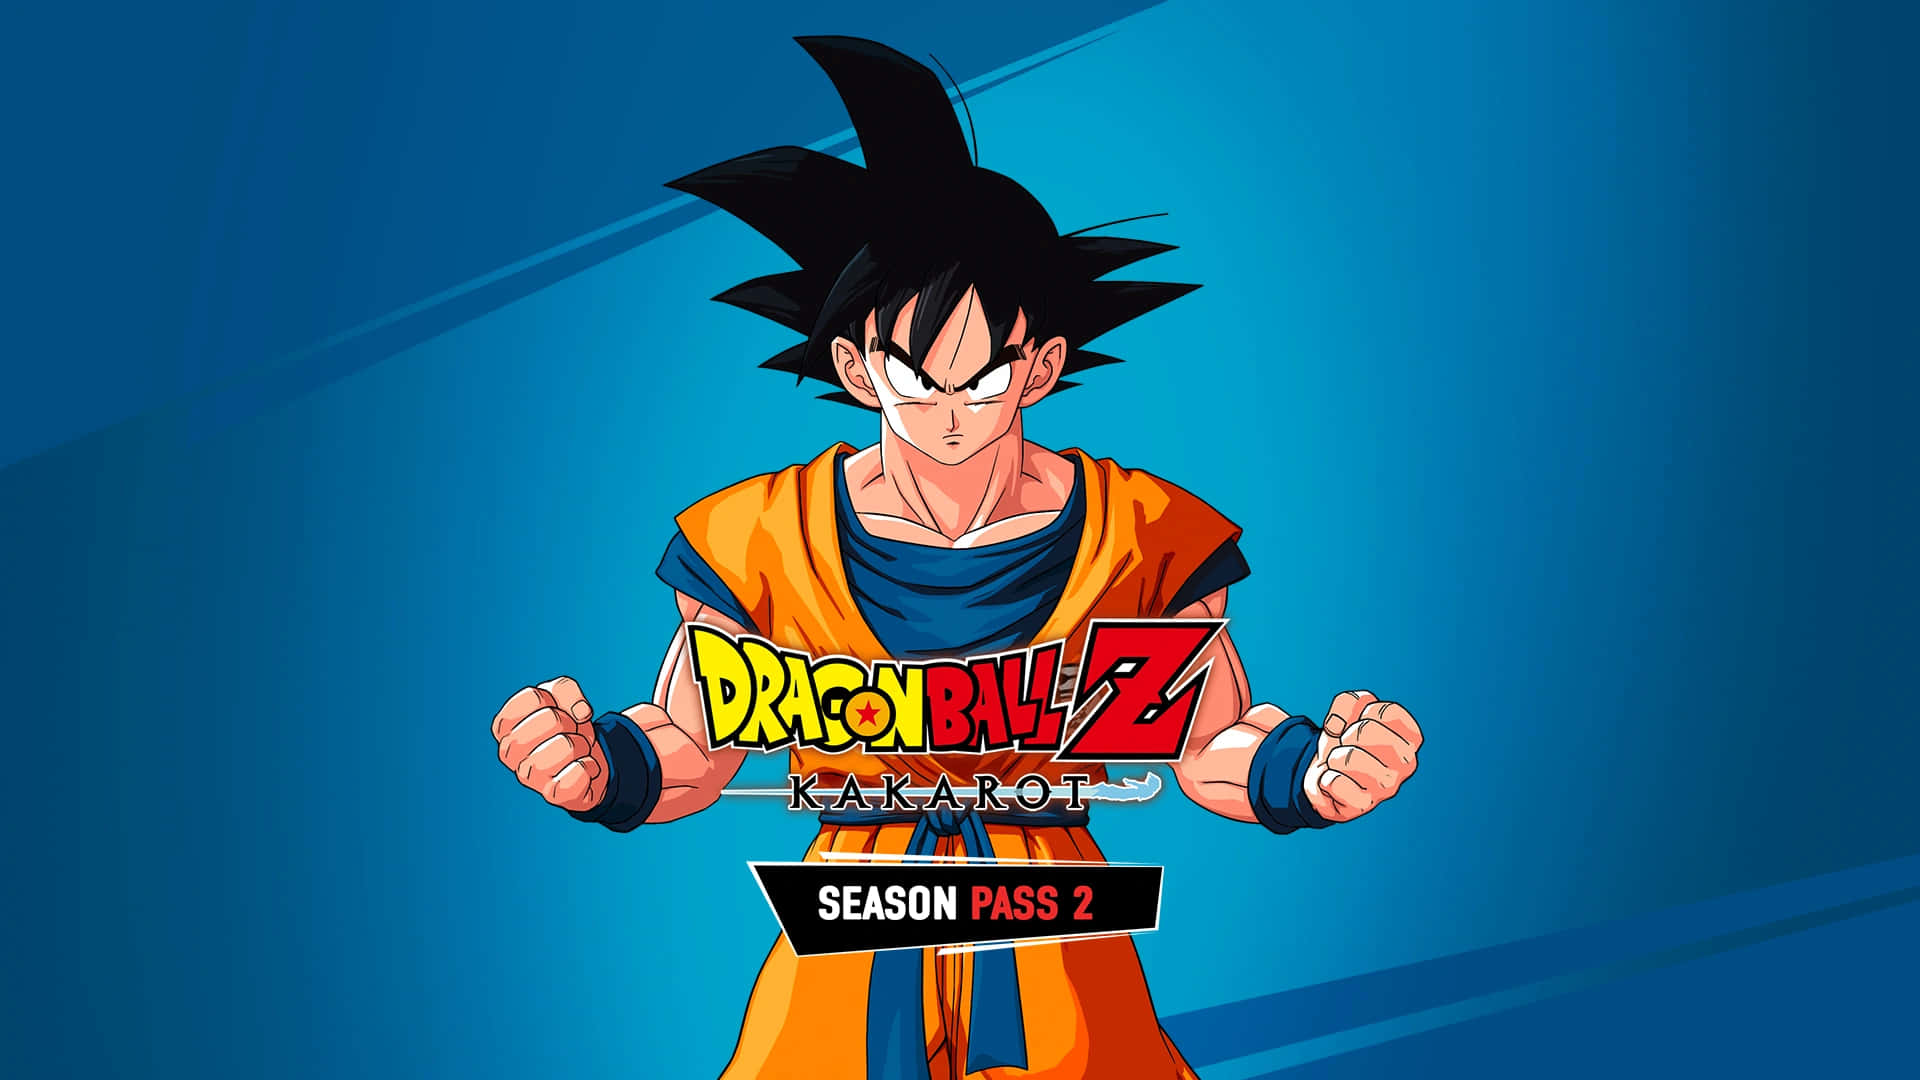 Free Dragonball Z Pictures , [100+] Dragonball Z Pictures for FREE |  